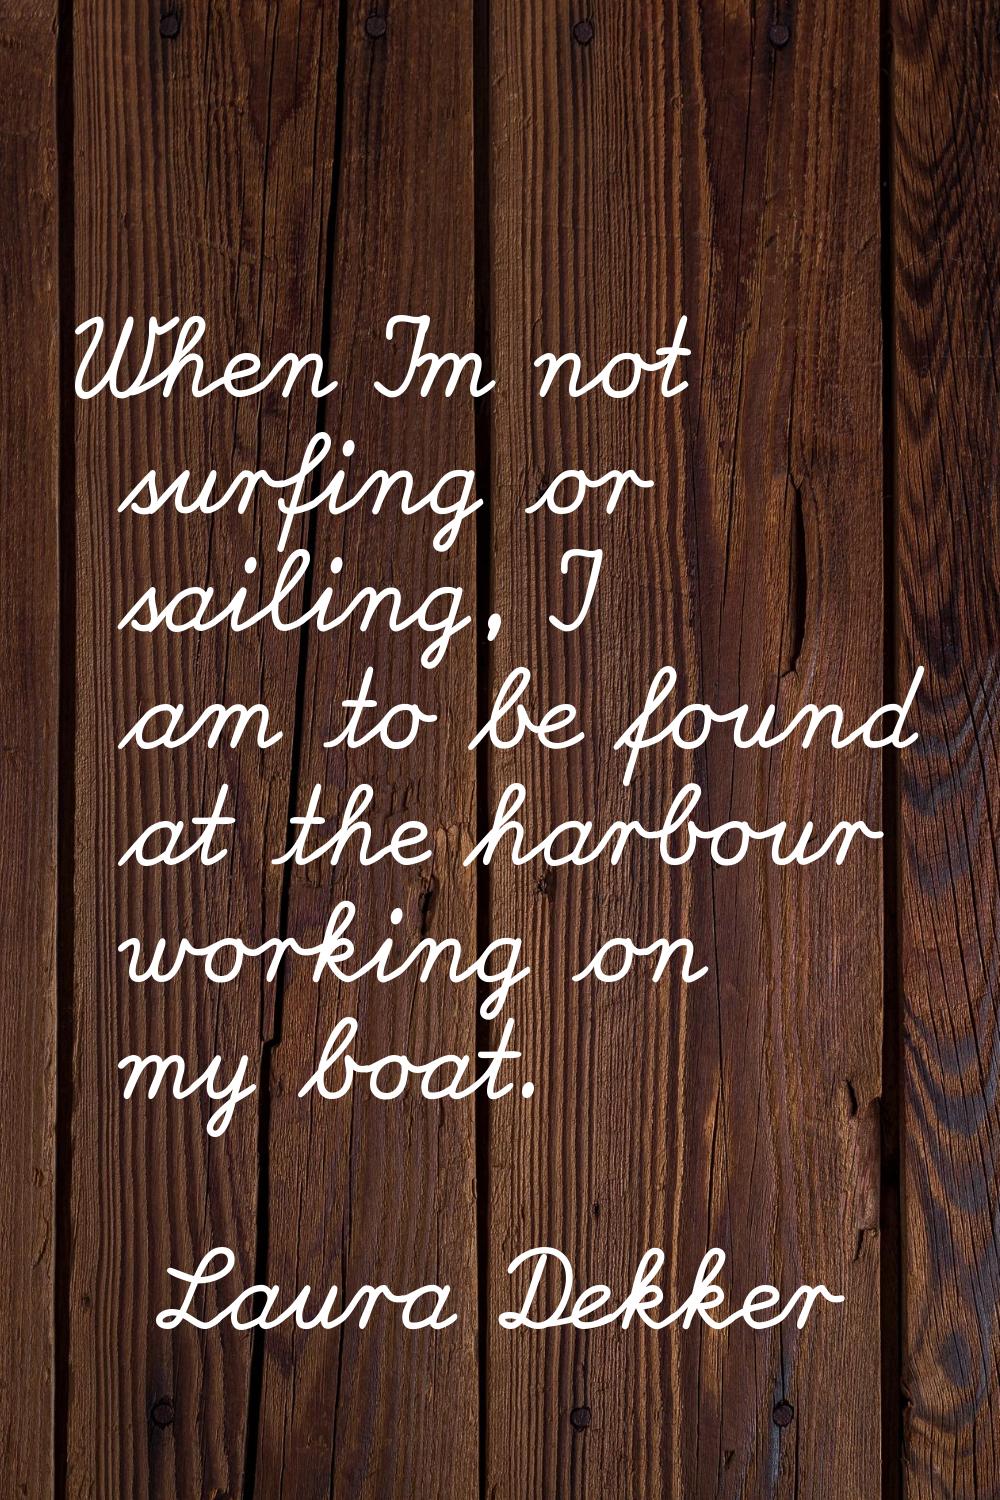 When I'm not surfing or sailing, I am to be found at the harbour working on my boat.